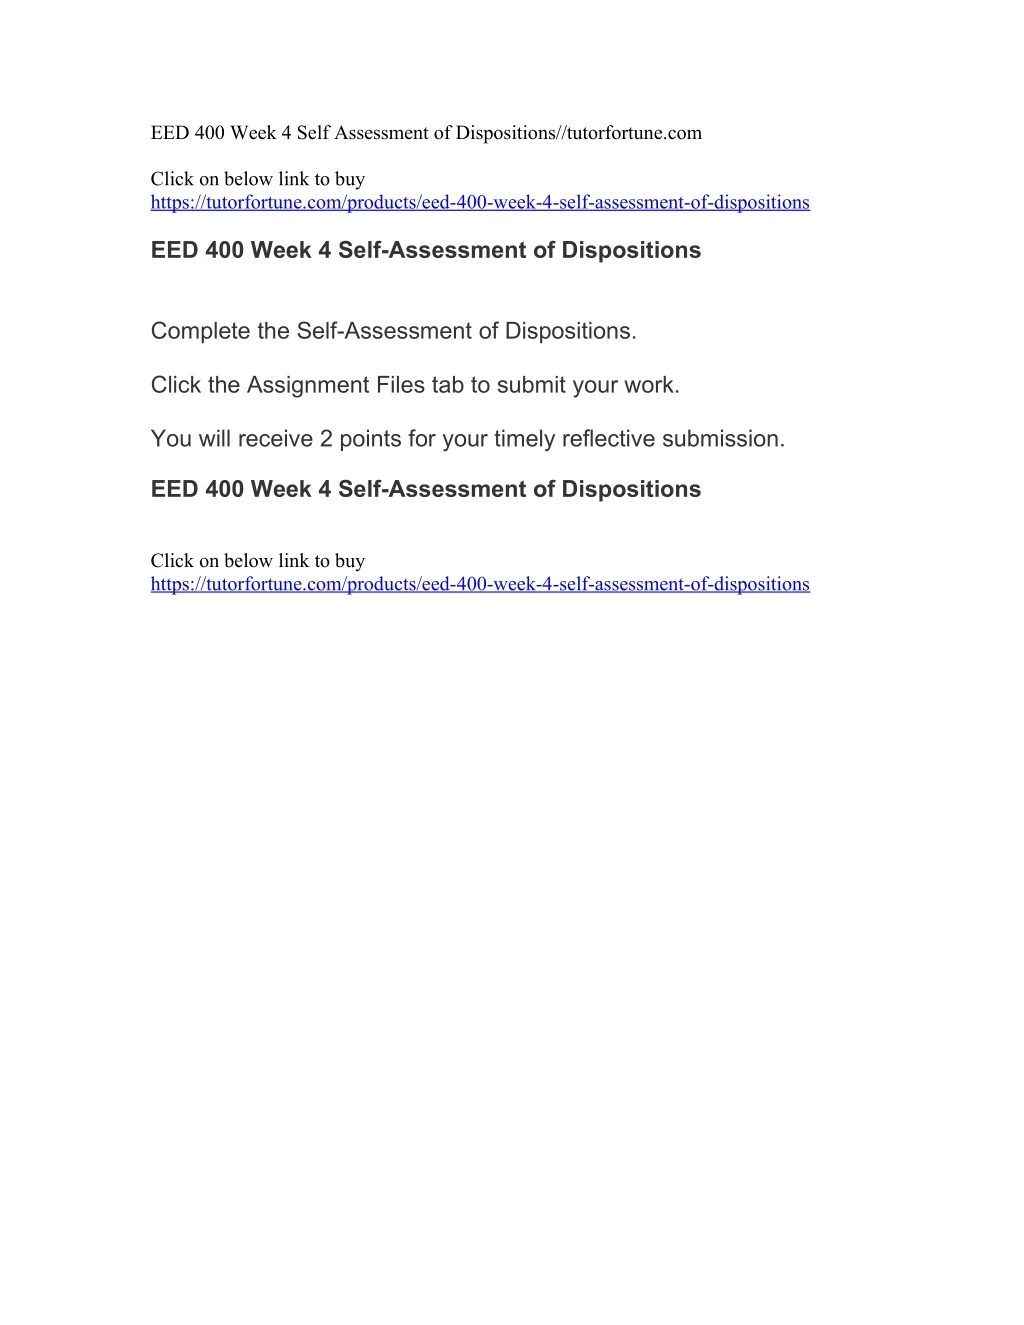 eed 400 week 4 self assessment of dispositions